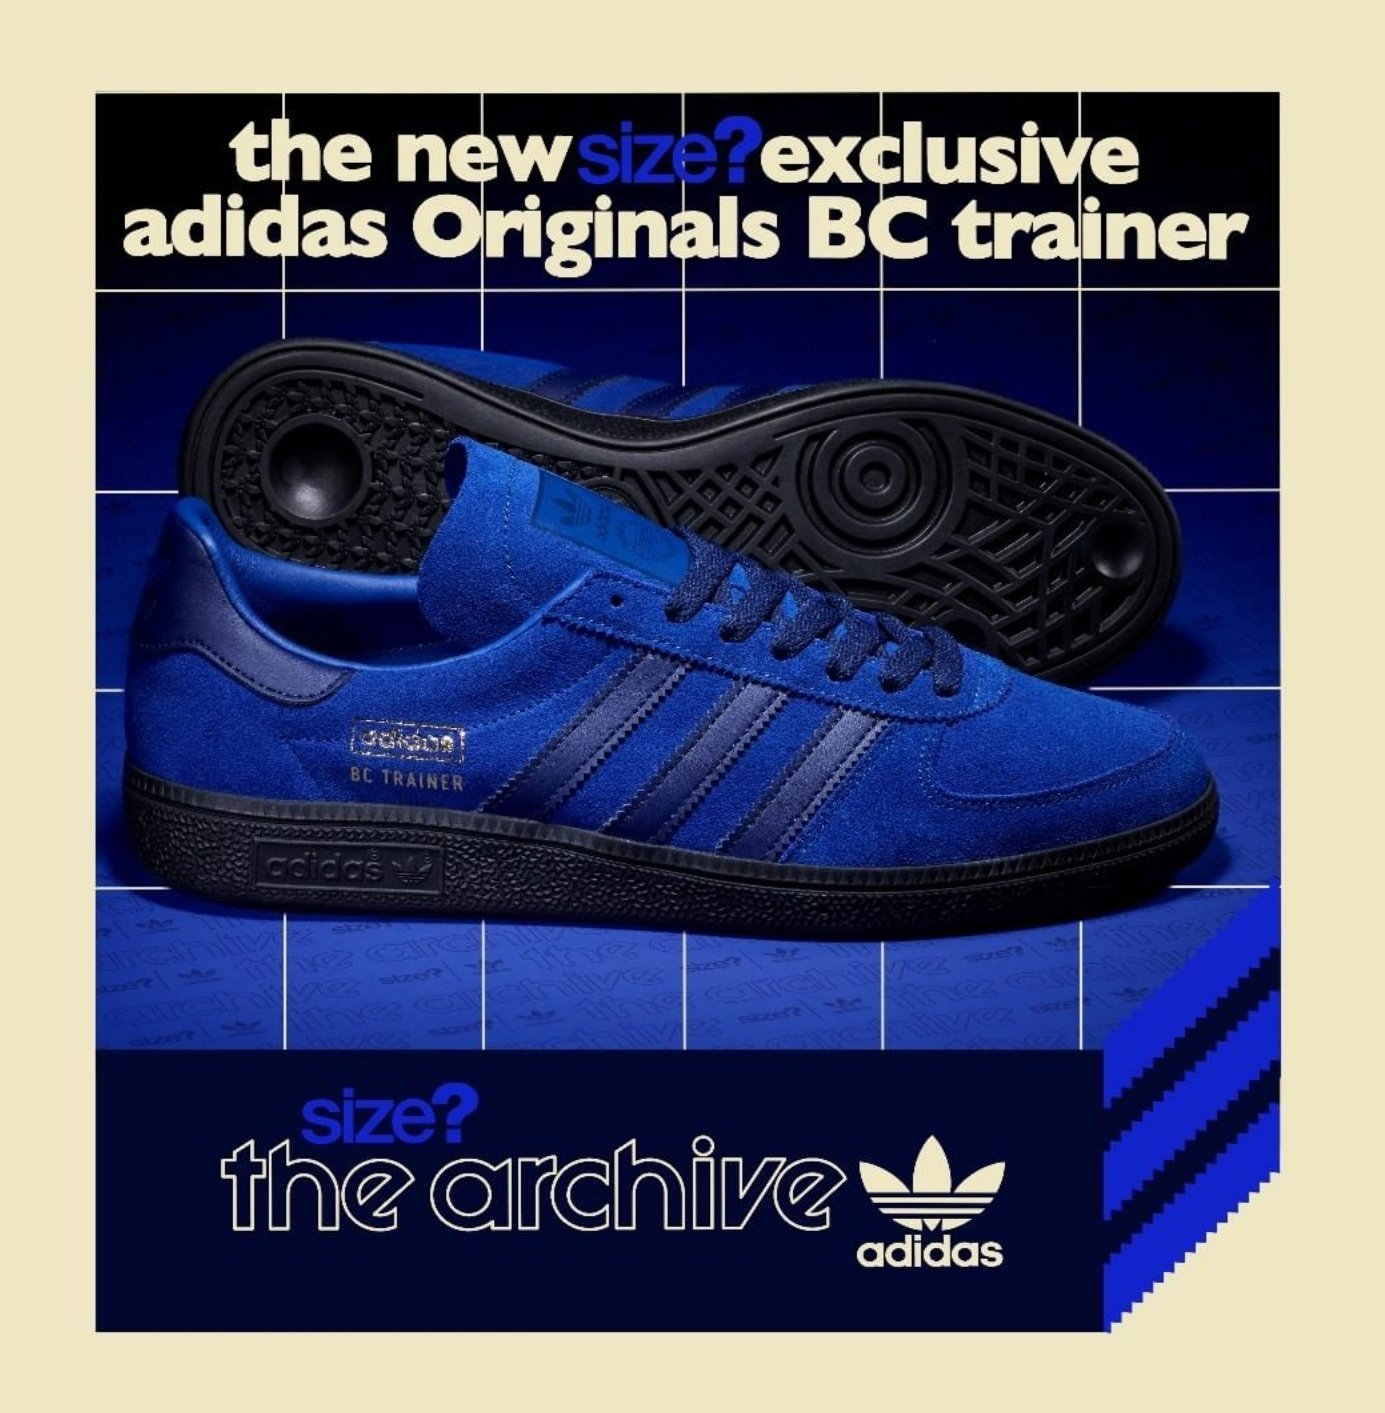 Man Savings on Twitter: .... BC 'Baltic Cup' Trainer exclusive to Size? Release date - to confirmed https://t.co/fdestETHc8" / Twitter